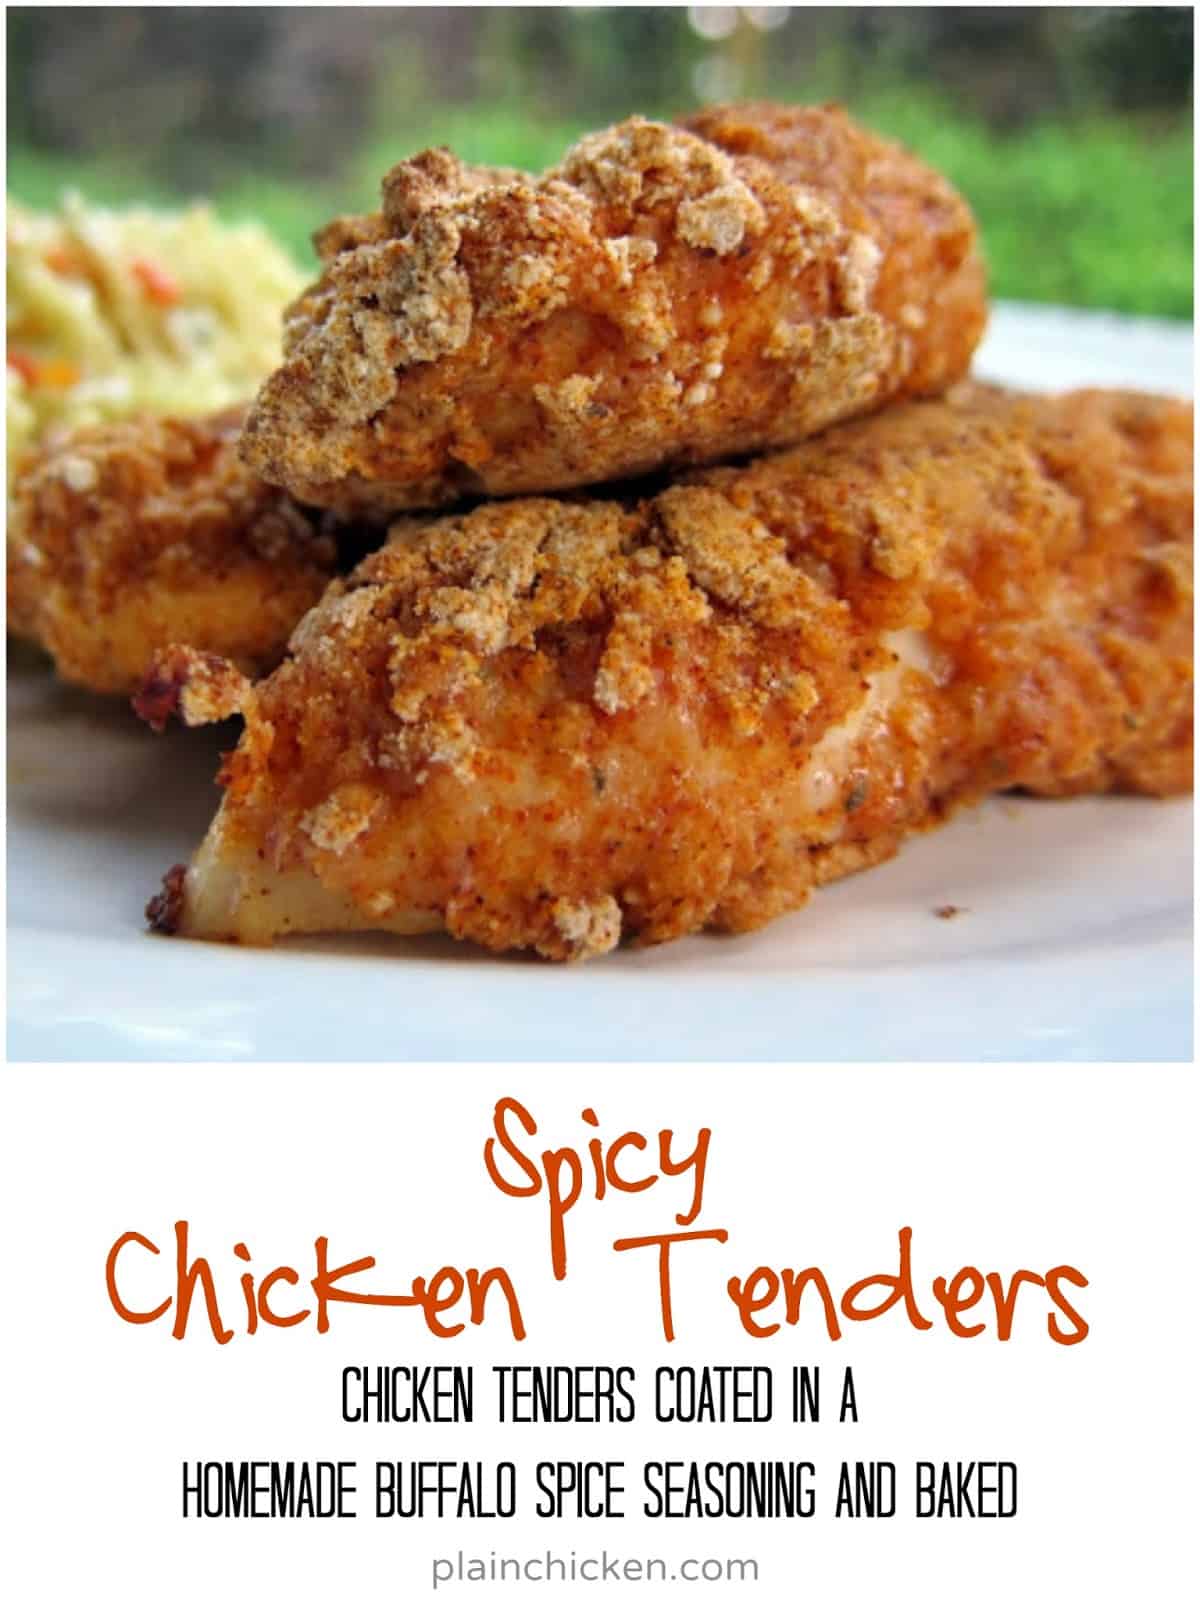 Spicy Chicken Tenders Recipe - chicken tenders coated in a homemade buffalo spice seasoning and baked. SO delicious. Can coat and freeze unbaked for a quick meal later.